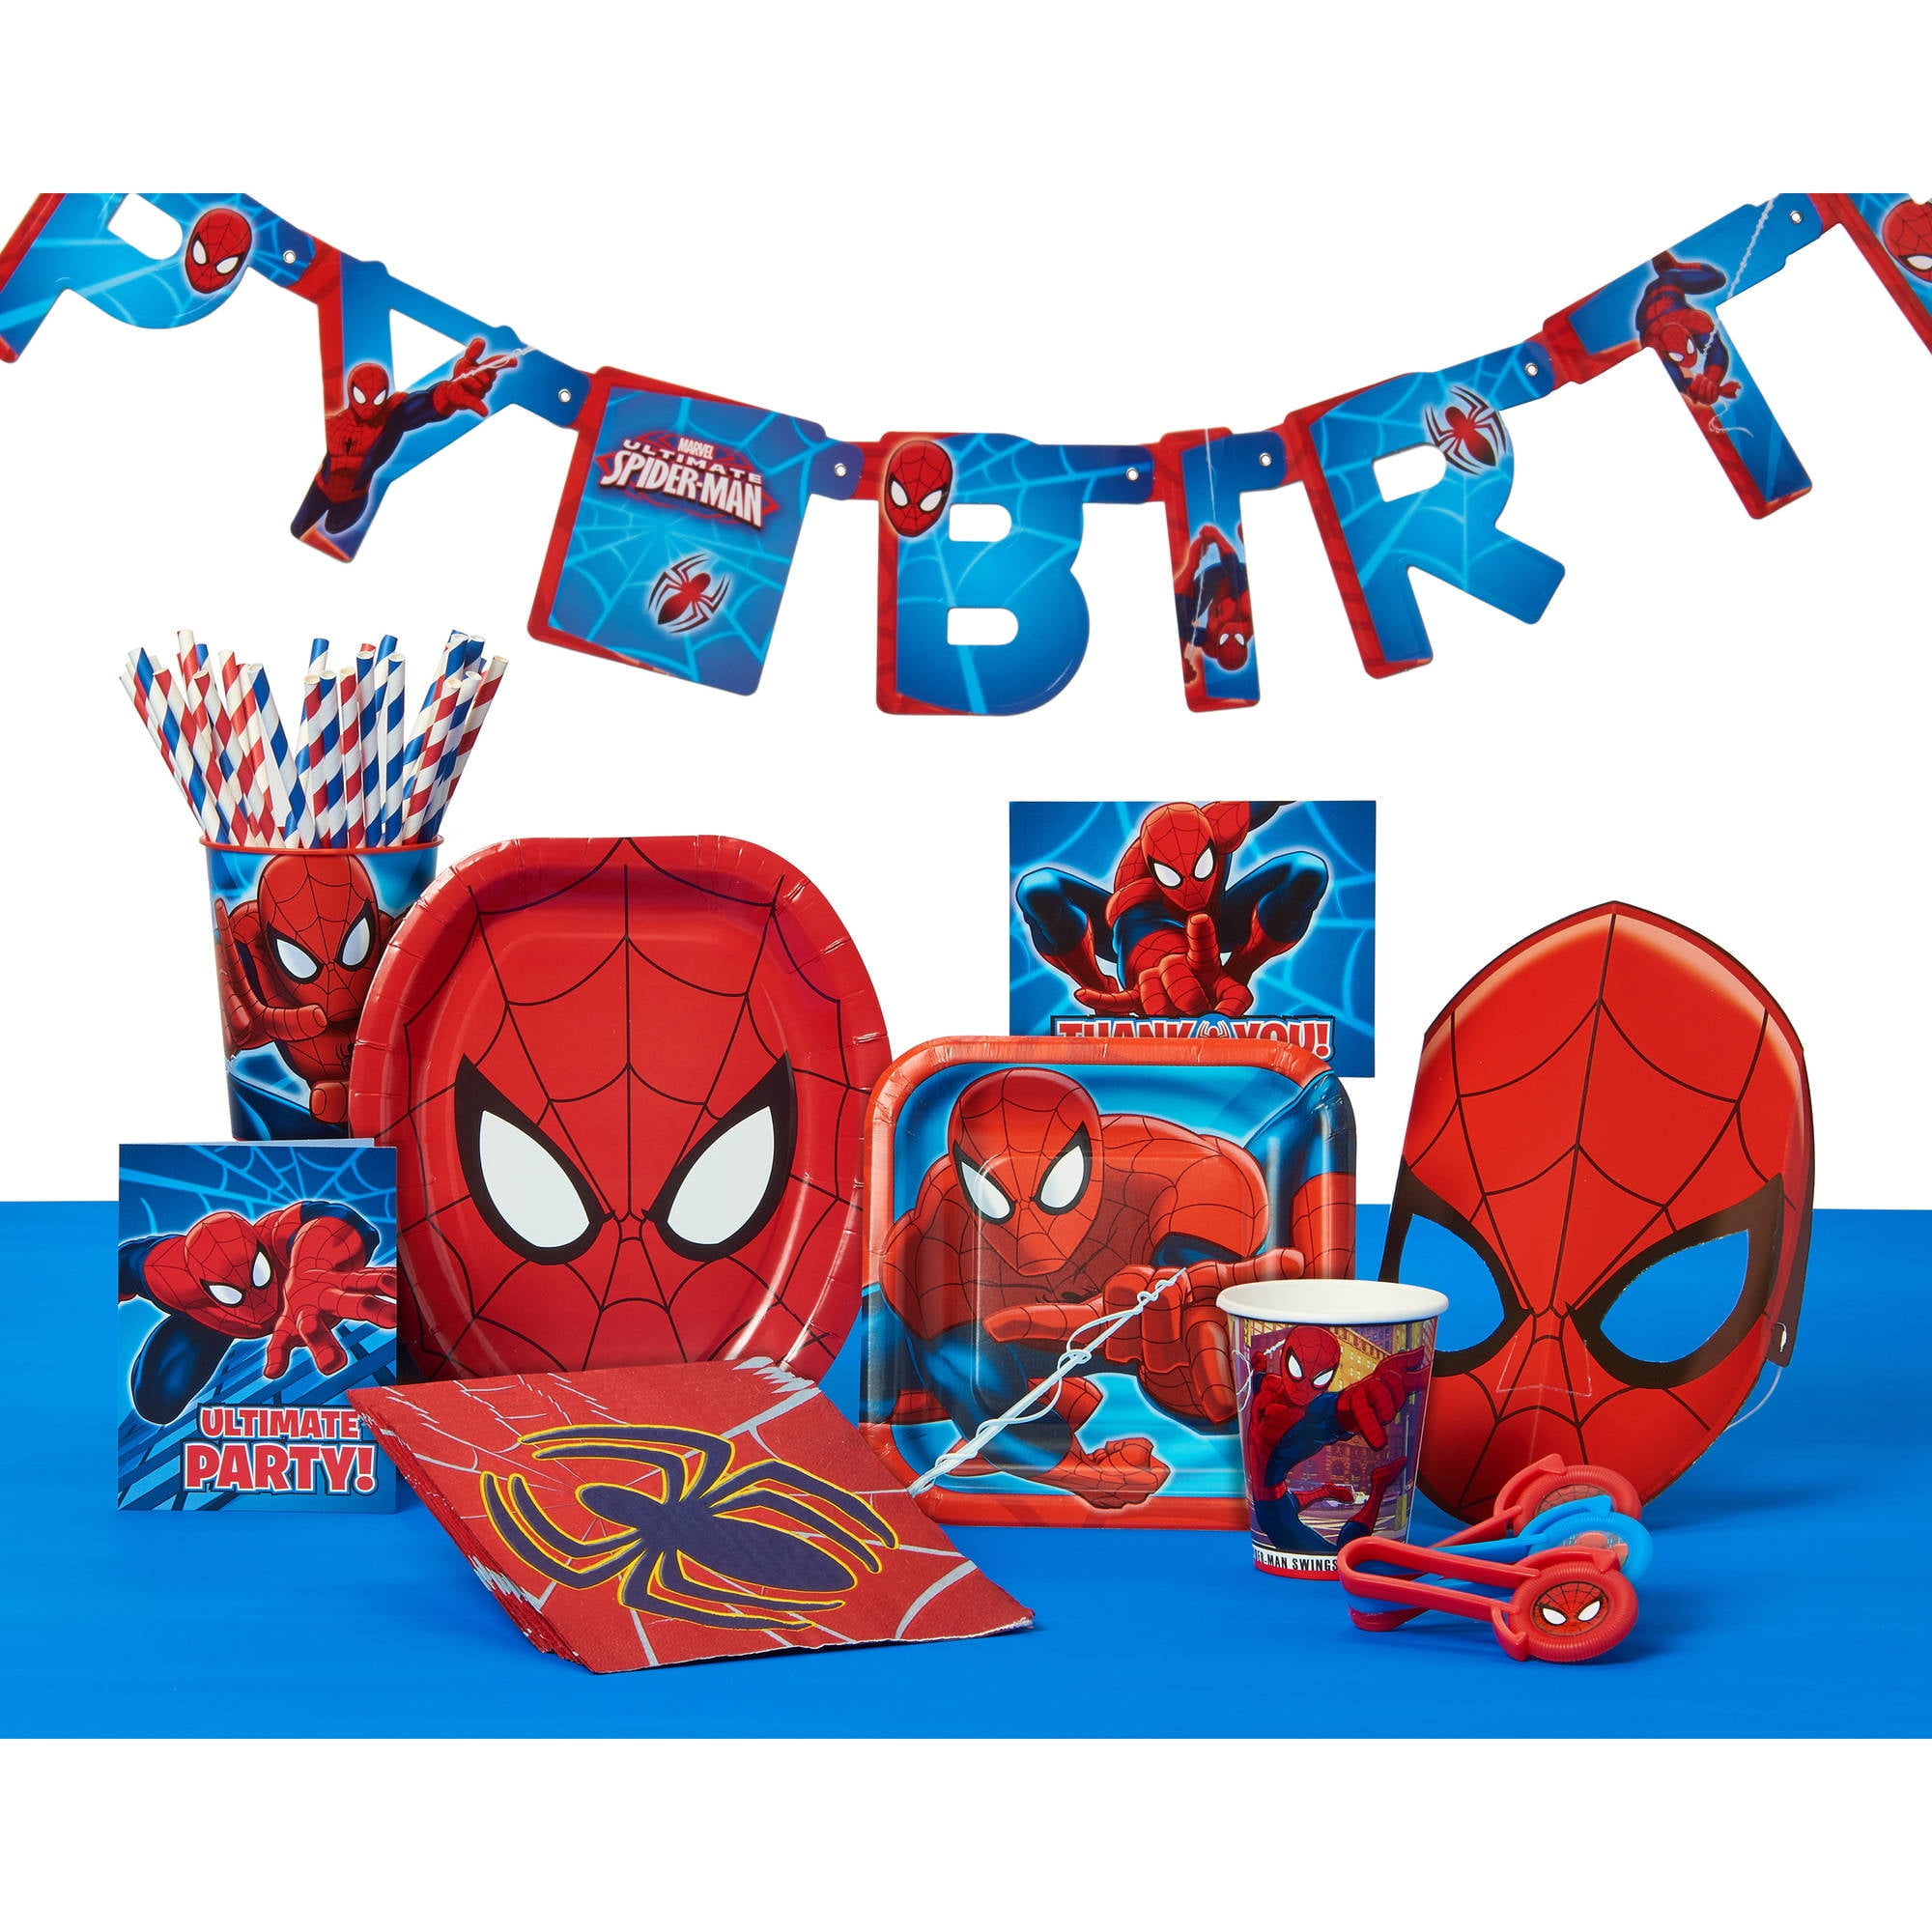  Spiderman  Party  Paper Plates 9 In 8ct Walmart  Com sc 1 st 